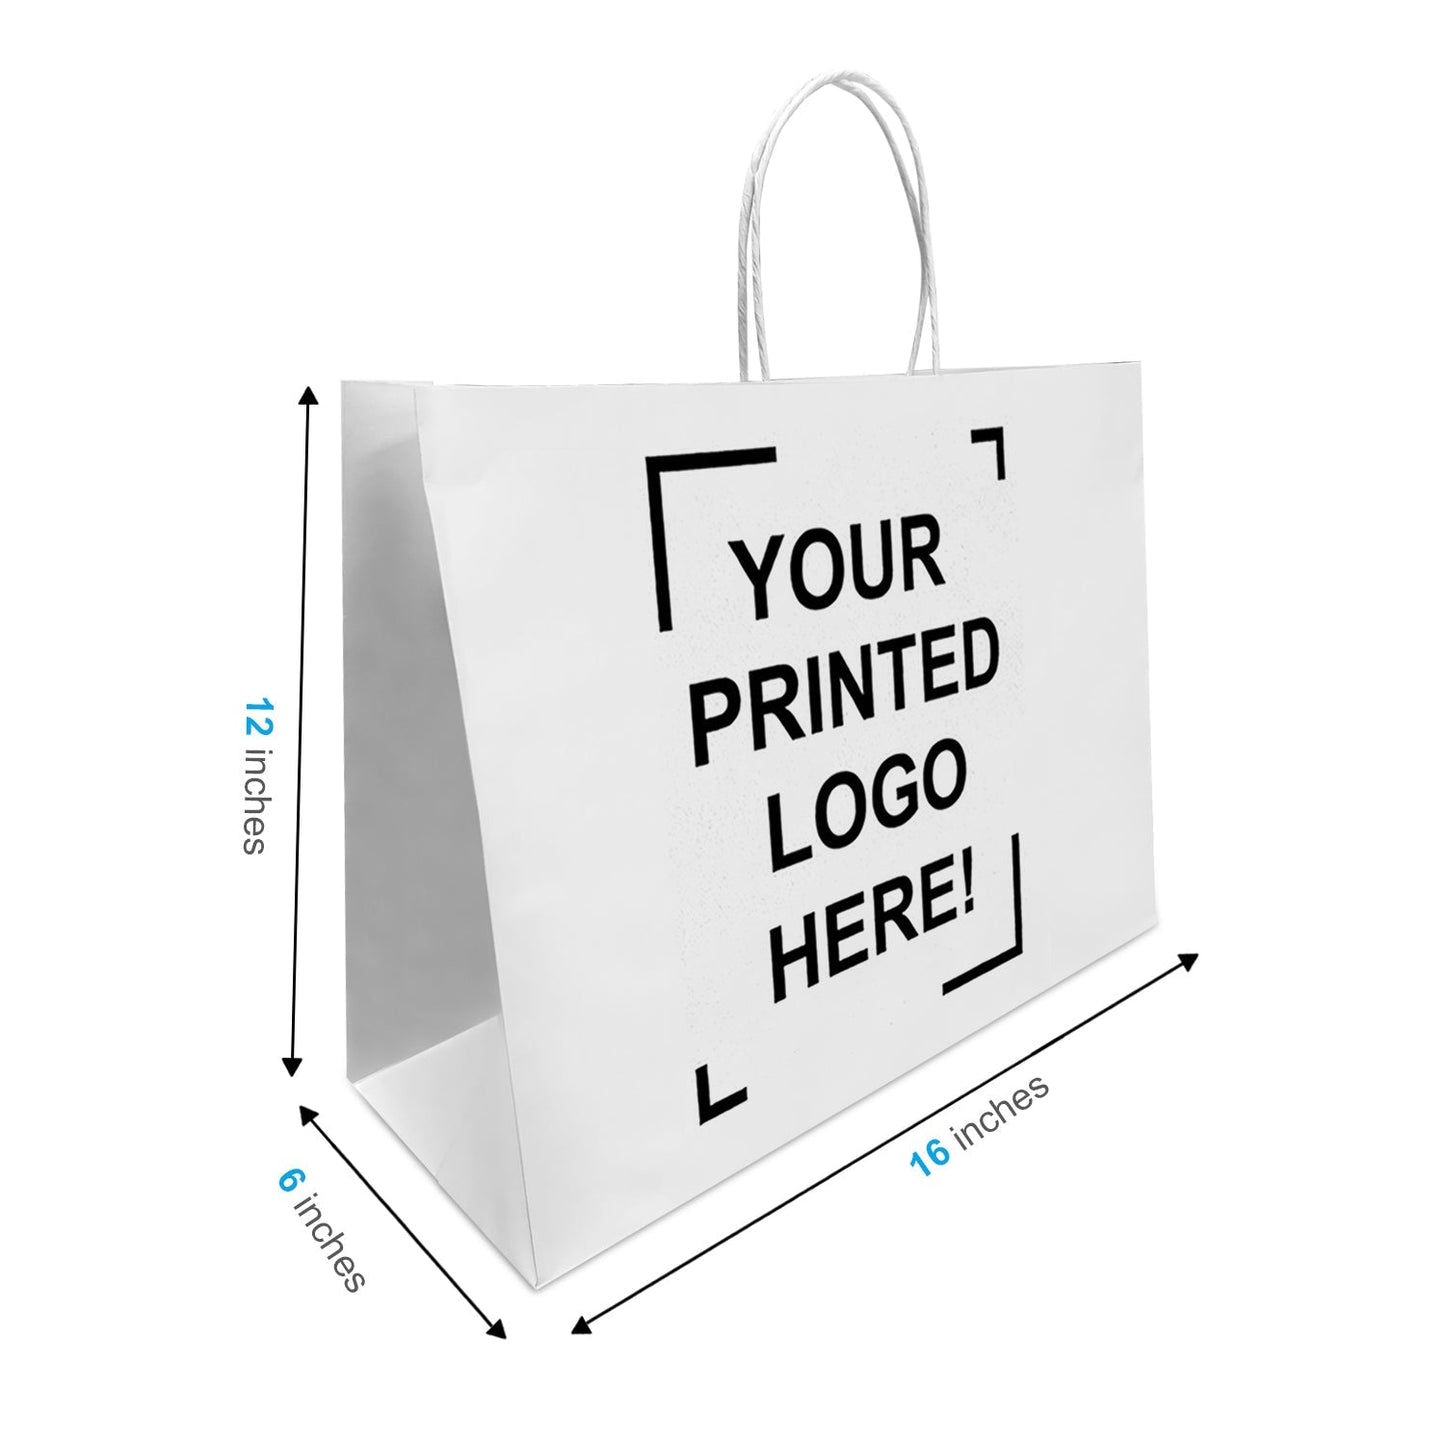 50pcs 1 Side Custom Print Vogue 16x6x12 inches White Kraft Paper Bags with Handles; $2.875/pc, Full Color Printed in North America